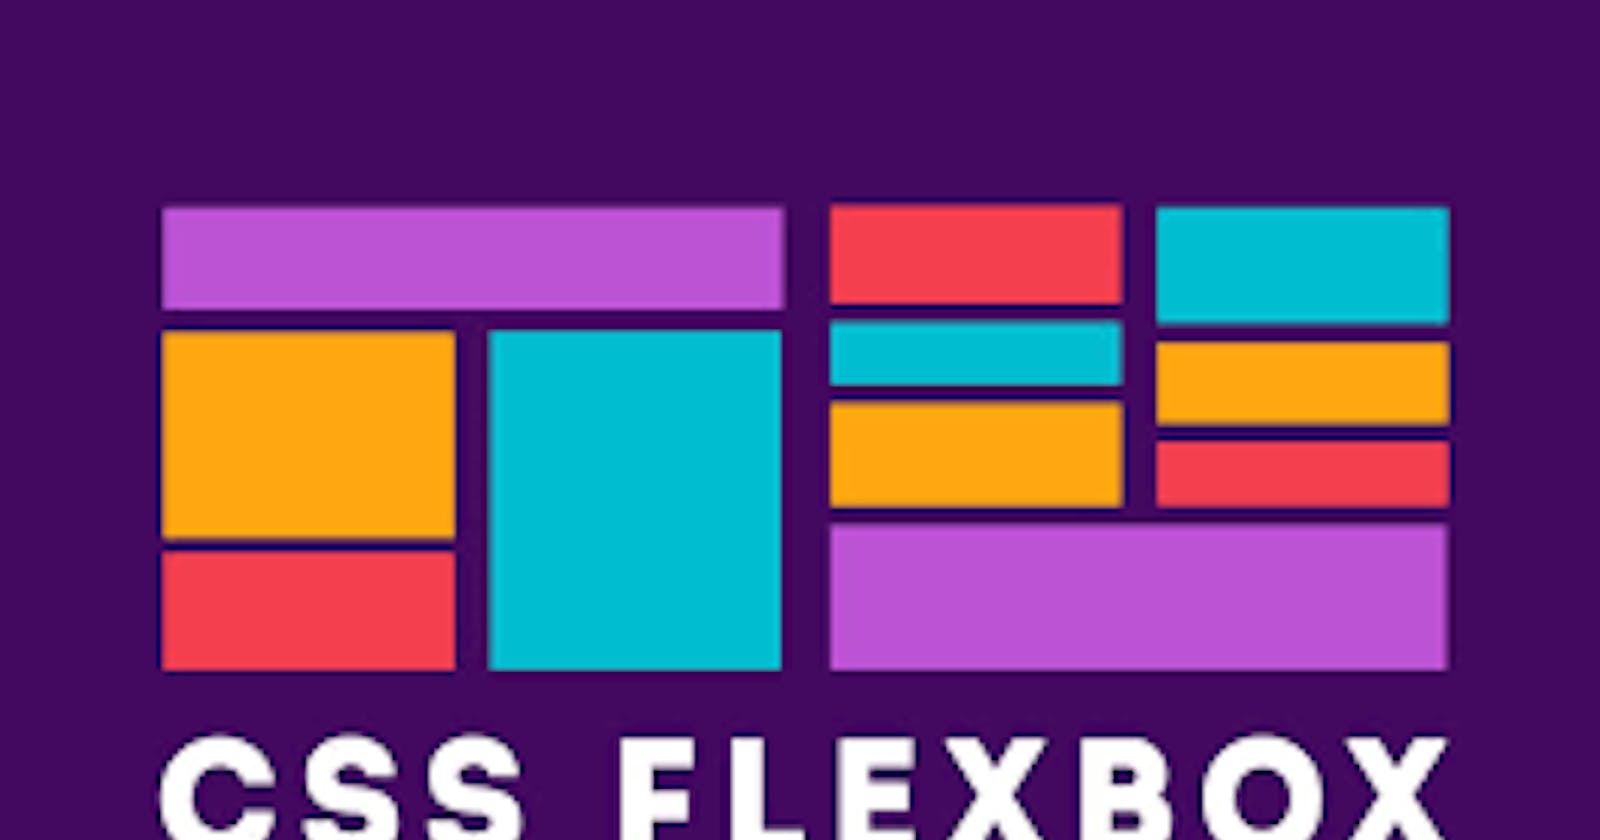 How to use flexbox in CSS